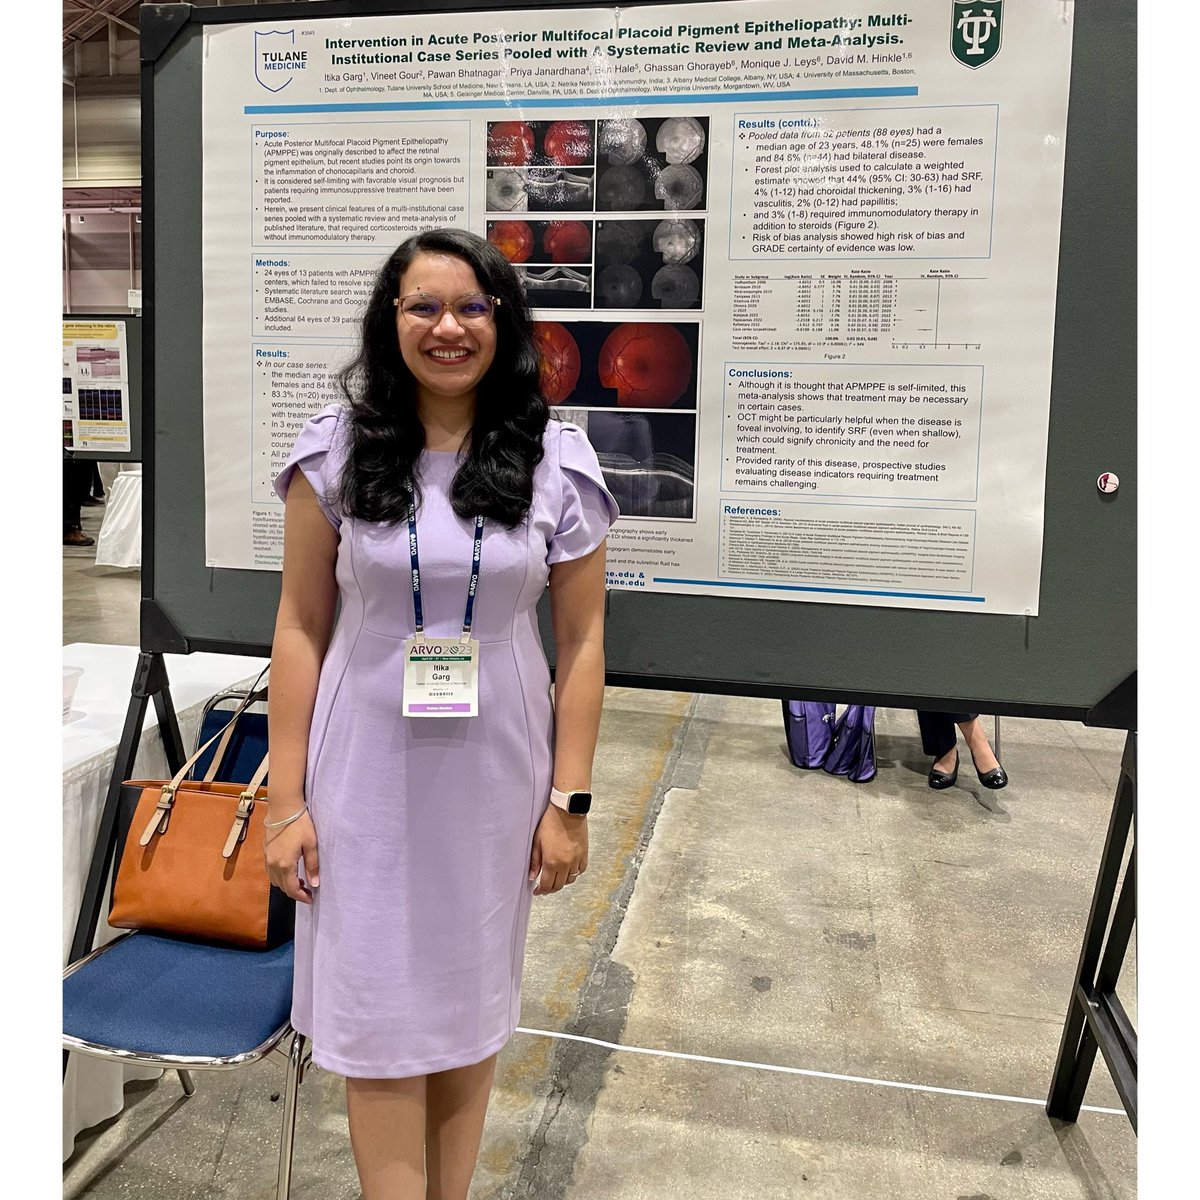 Incredibly honored to present our work from @TulaneMedicine #Ophthalmology at #ARVO2023 in #nola 💜💚💛💙 @LCMCHealthEdu @ARVOinfo